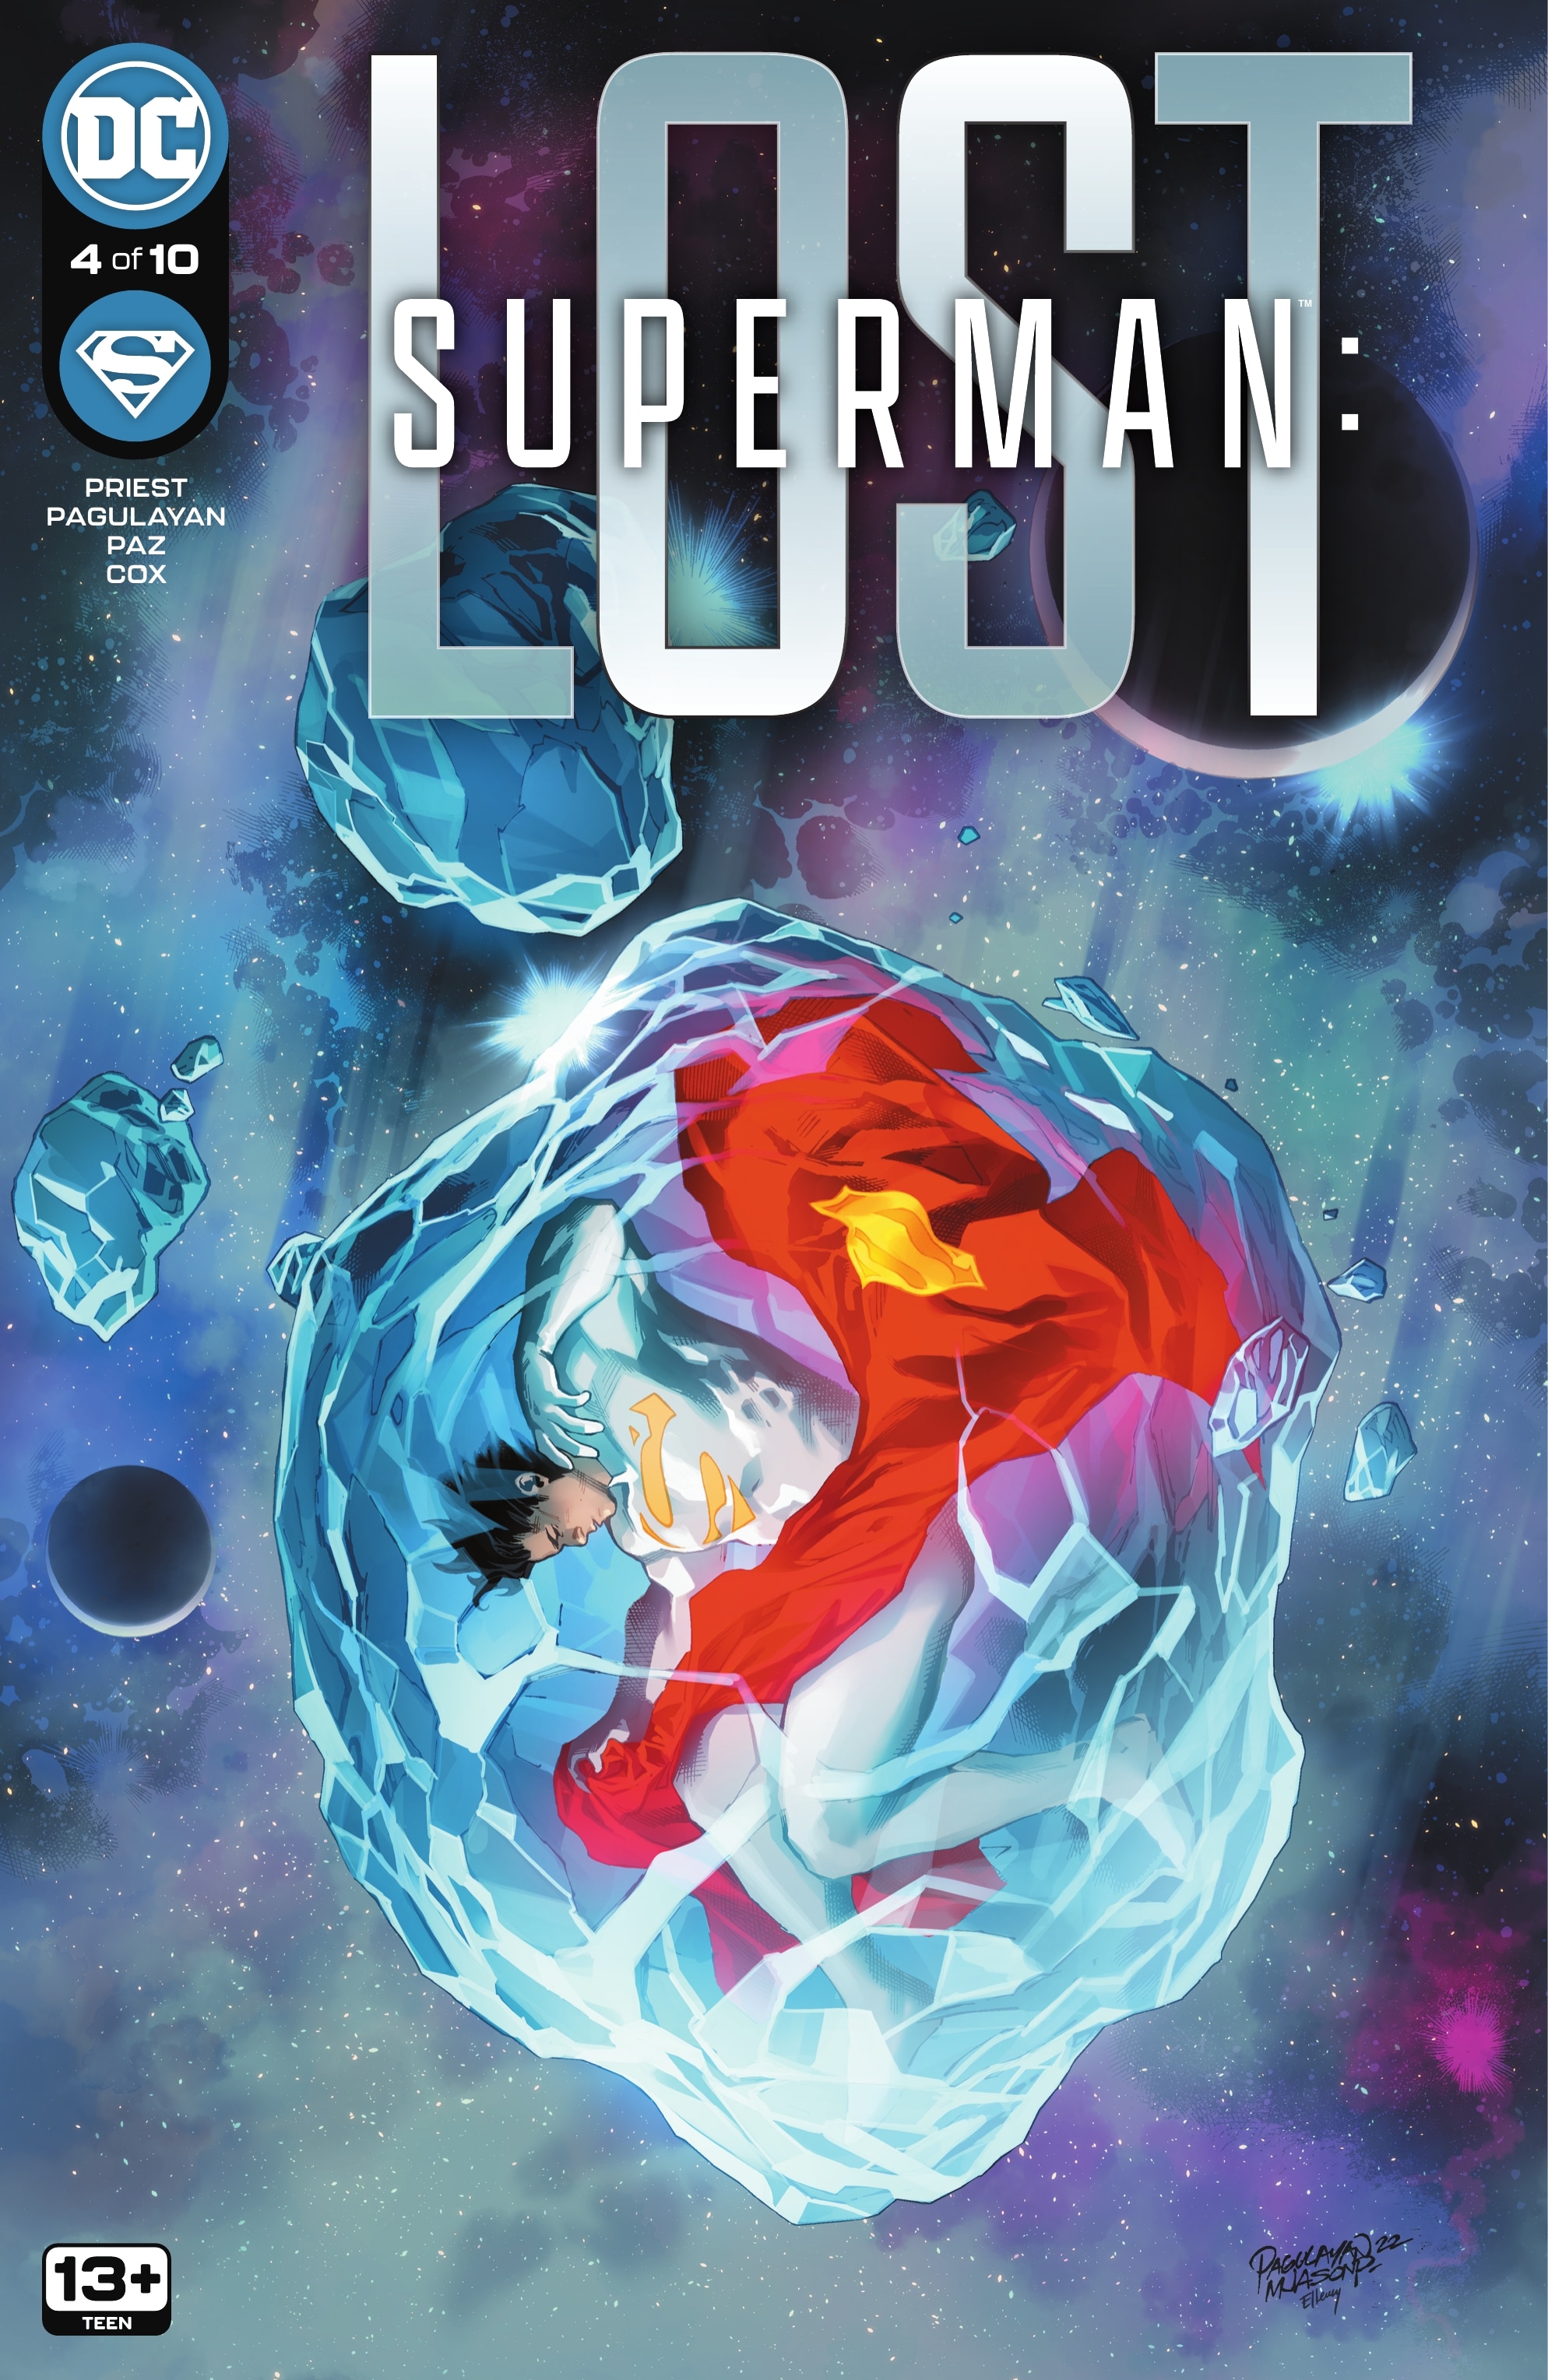 Read online Superman: Lost comic -  Issue #4 - 1